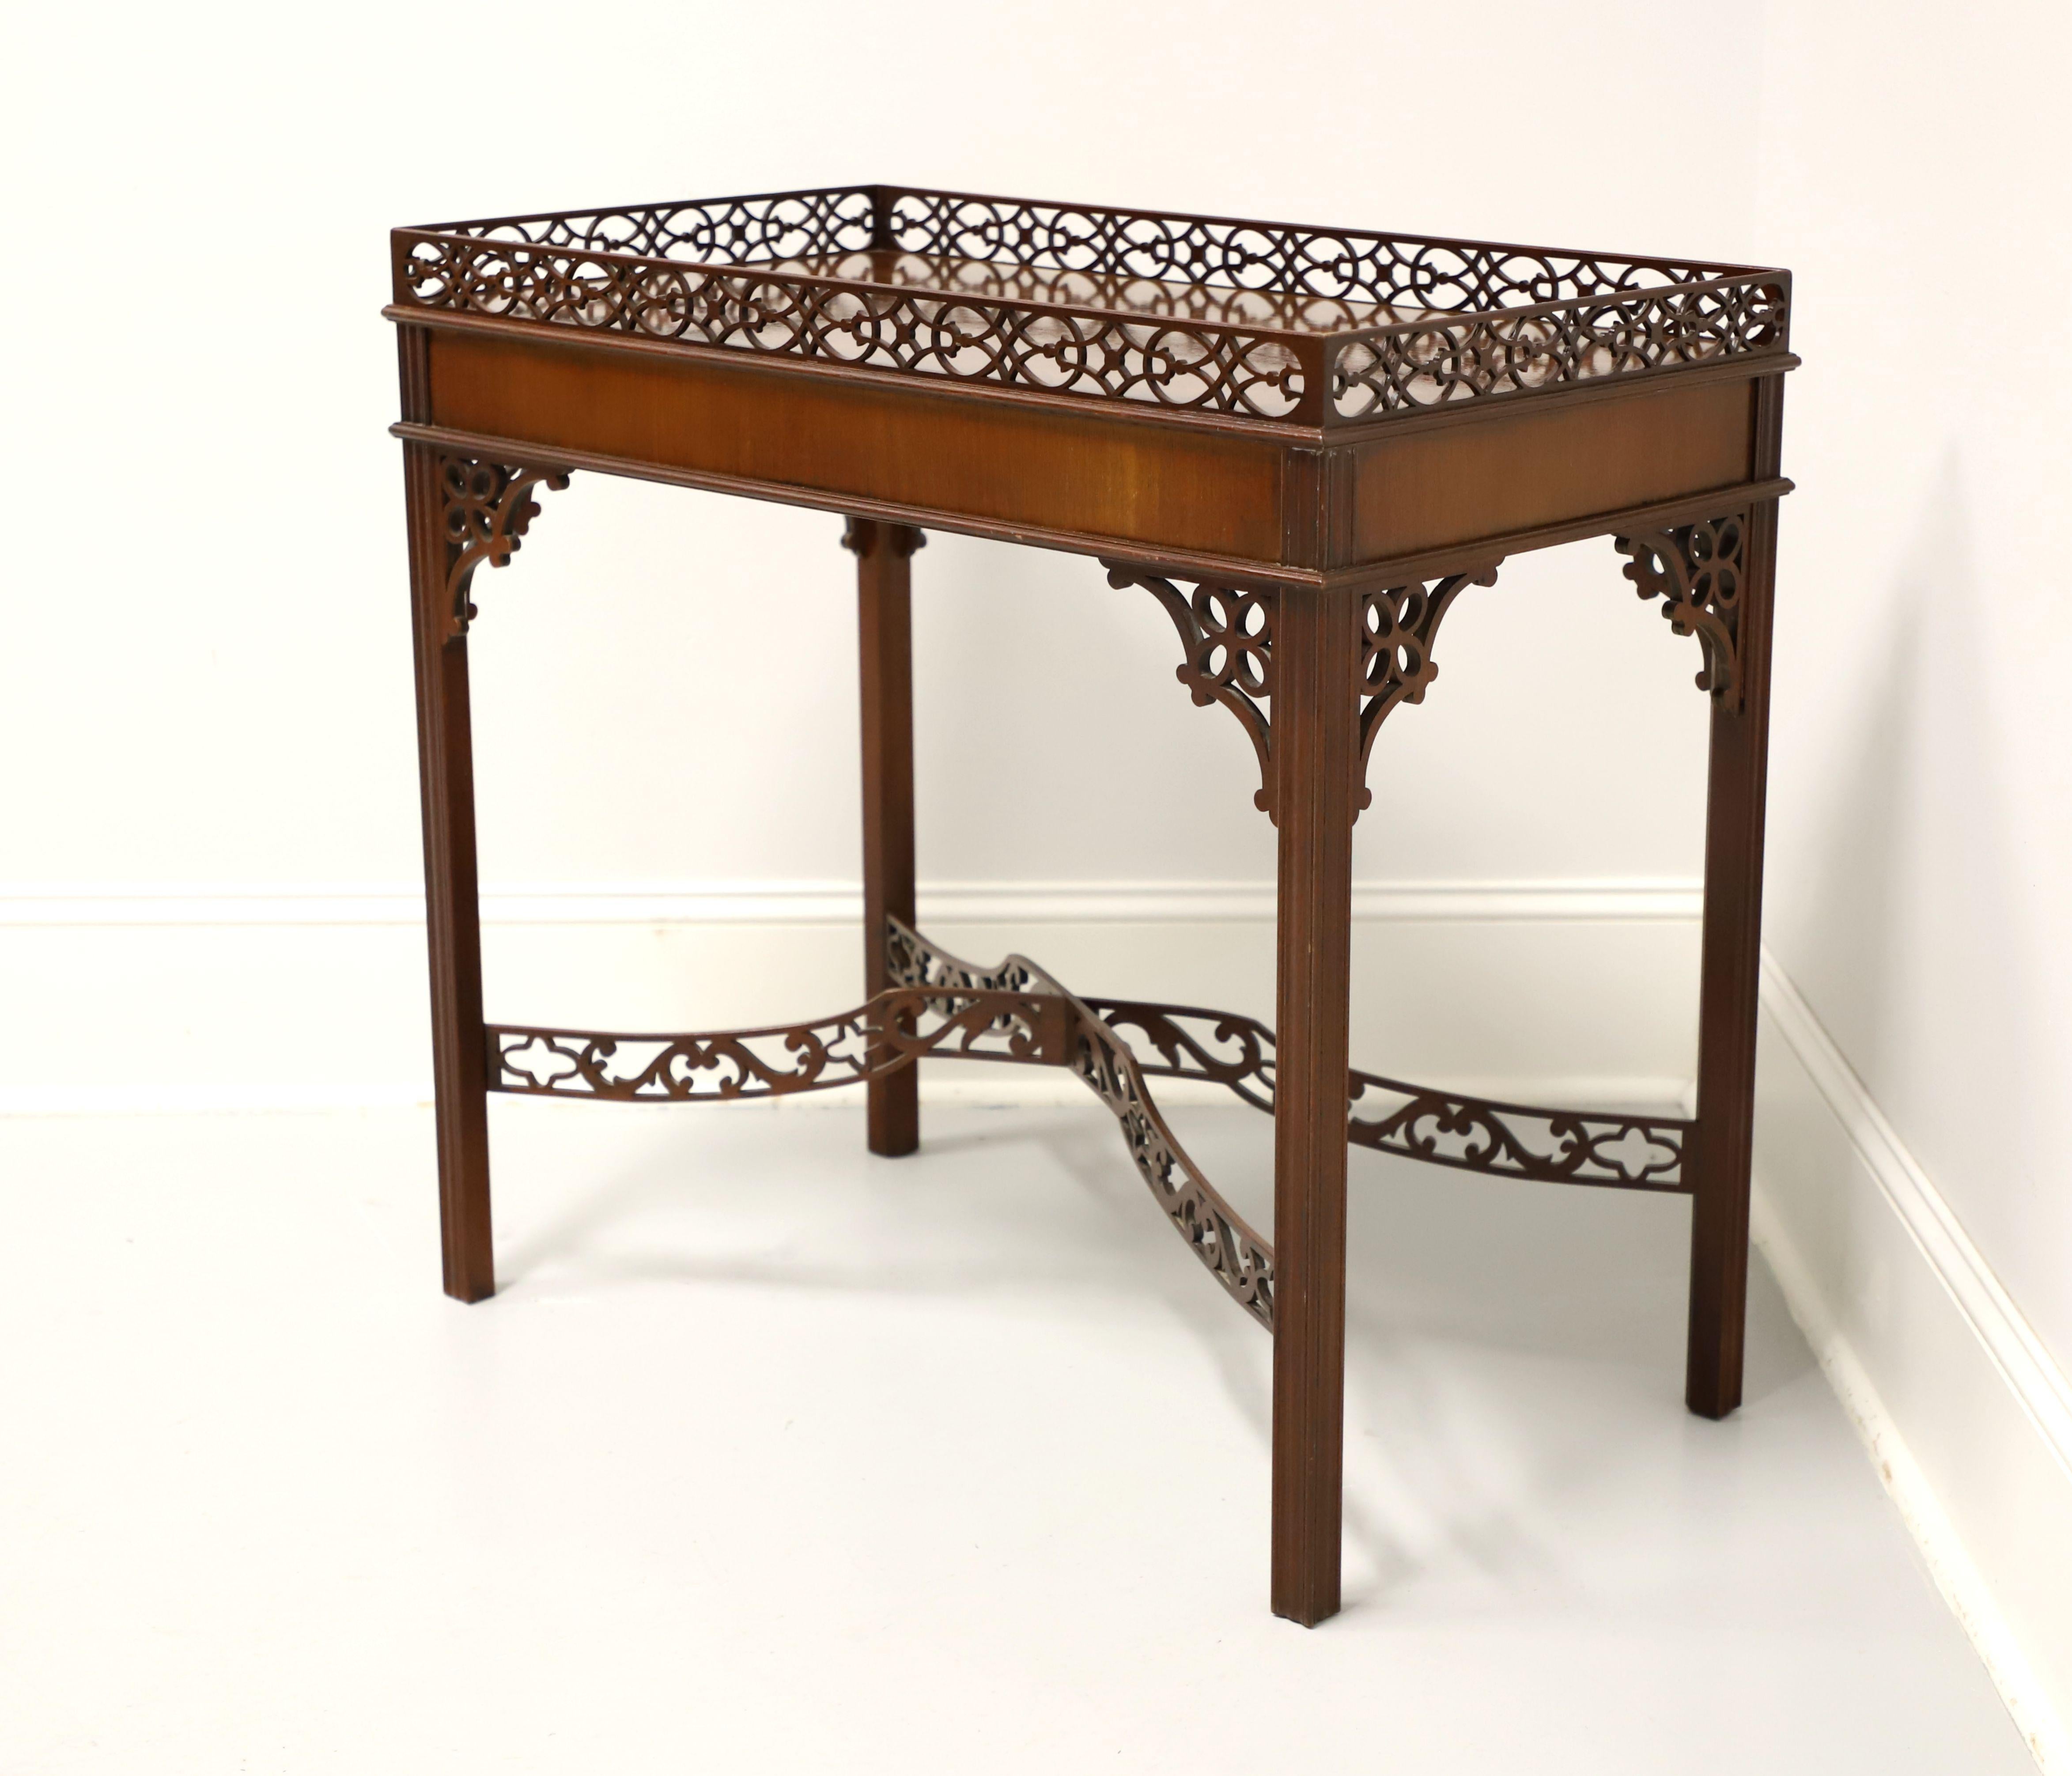 American BAKER Mahogany Chippendale Style Fretwork Gallery Tea Table